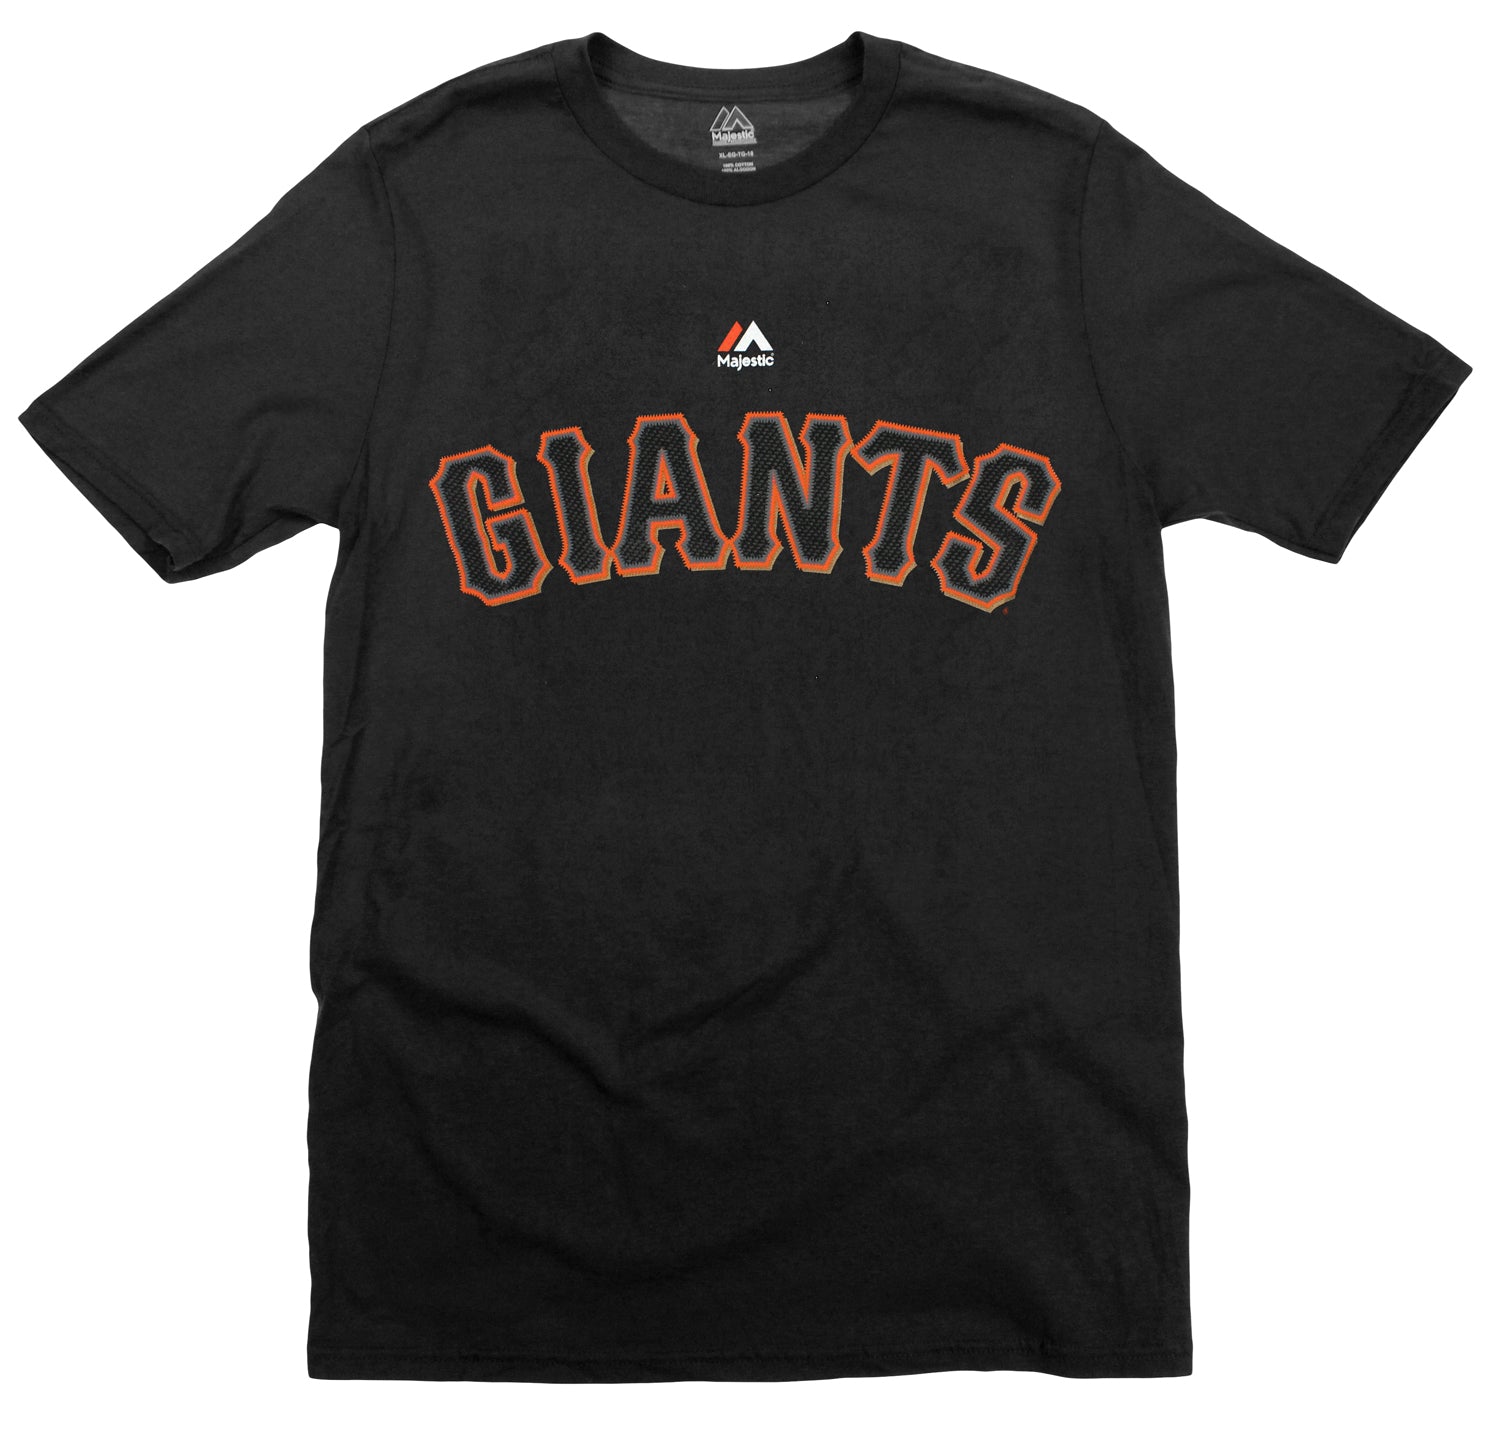 Majestic MLB Youth San Francisco Giants Star Wars Sith Lord #0 T-Shirt, Black - Large (14-16)